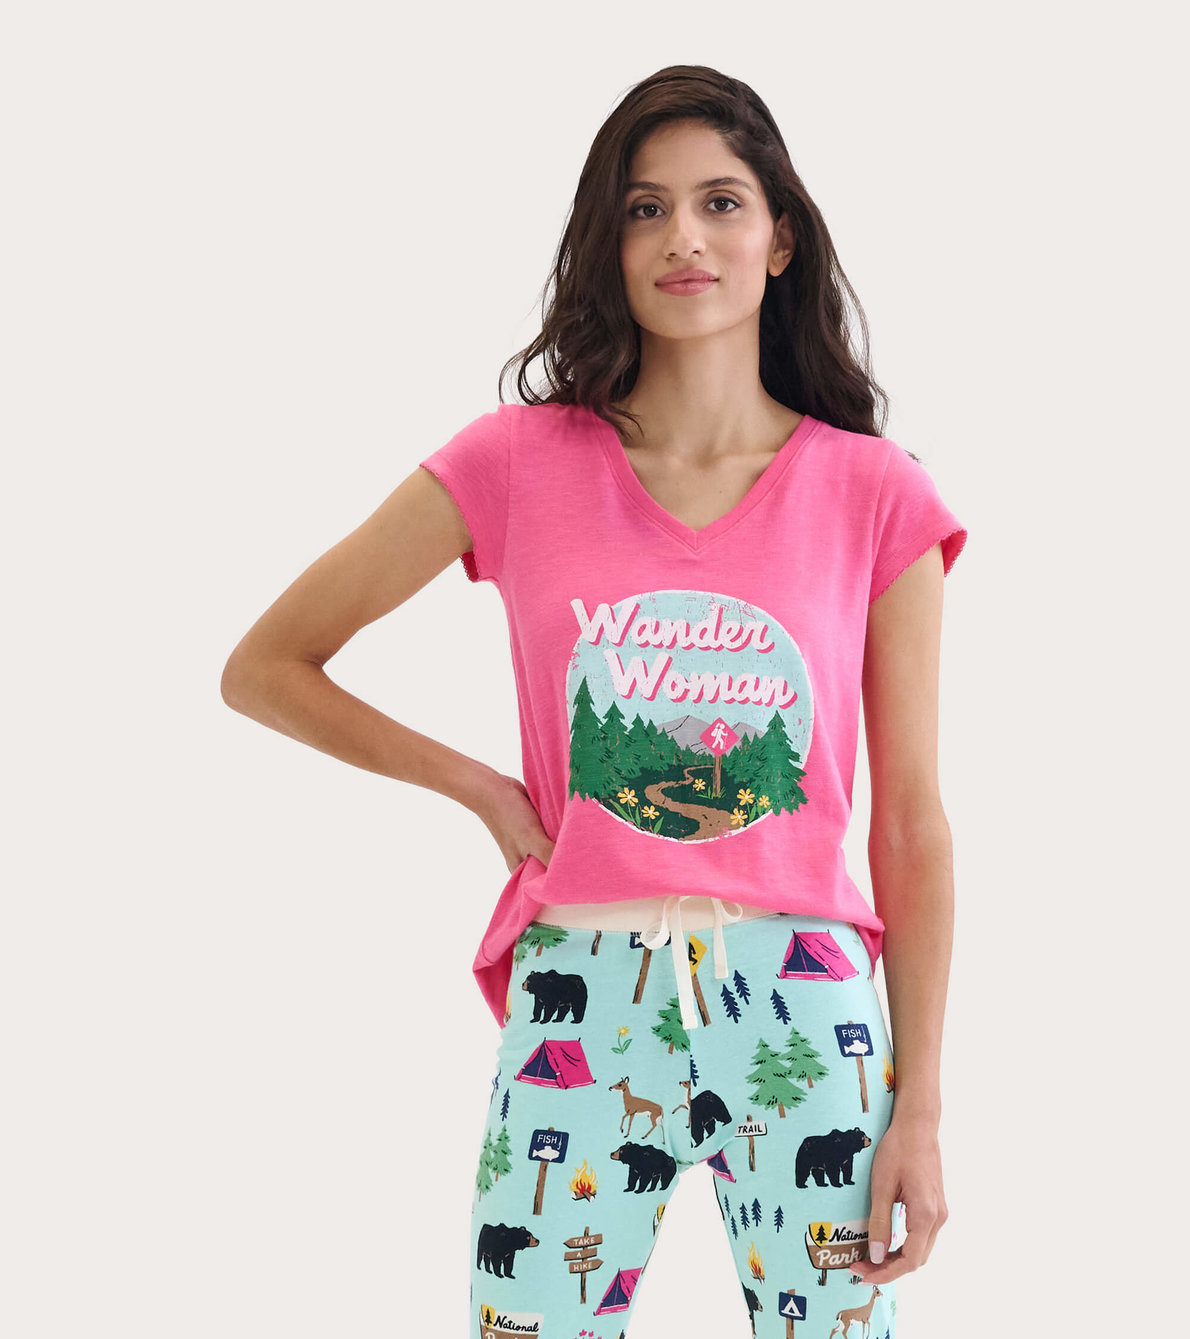 View larger image of Wander Woman Women's V-Neck Tee